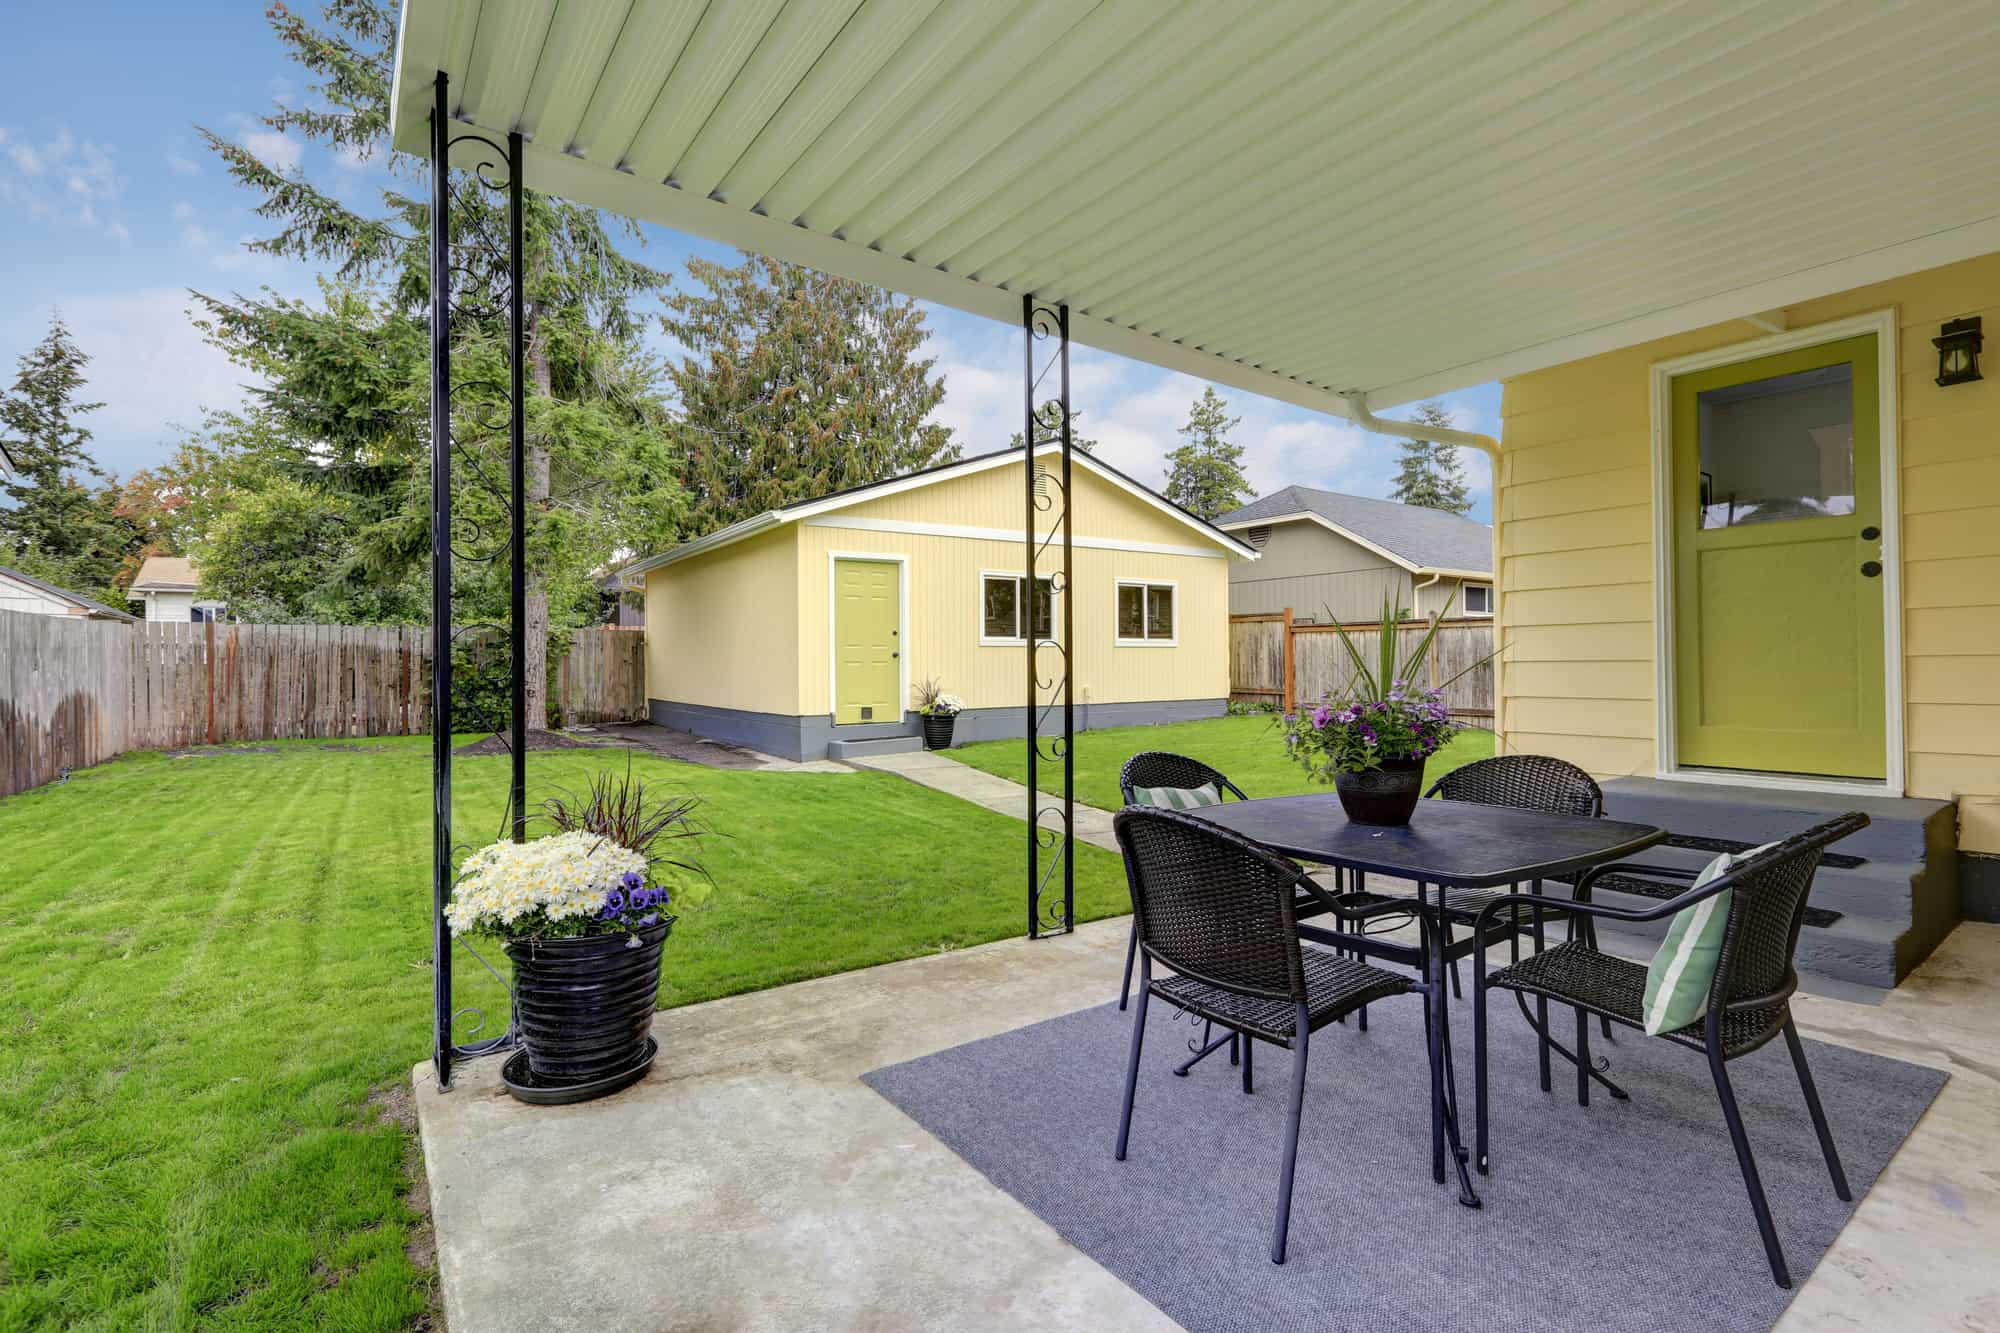 Is an Aluminum Patio Cover Worth The Cost?